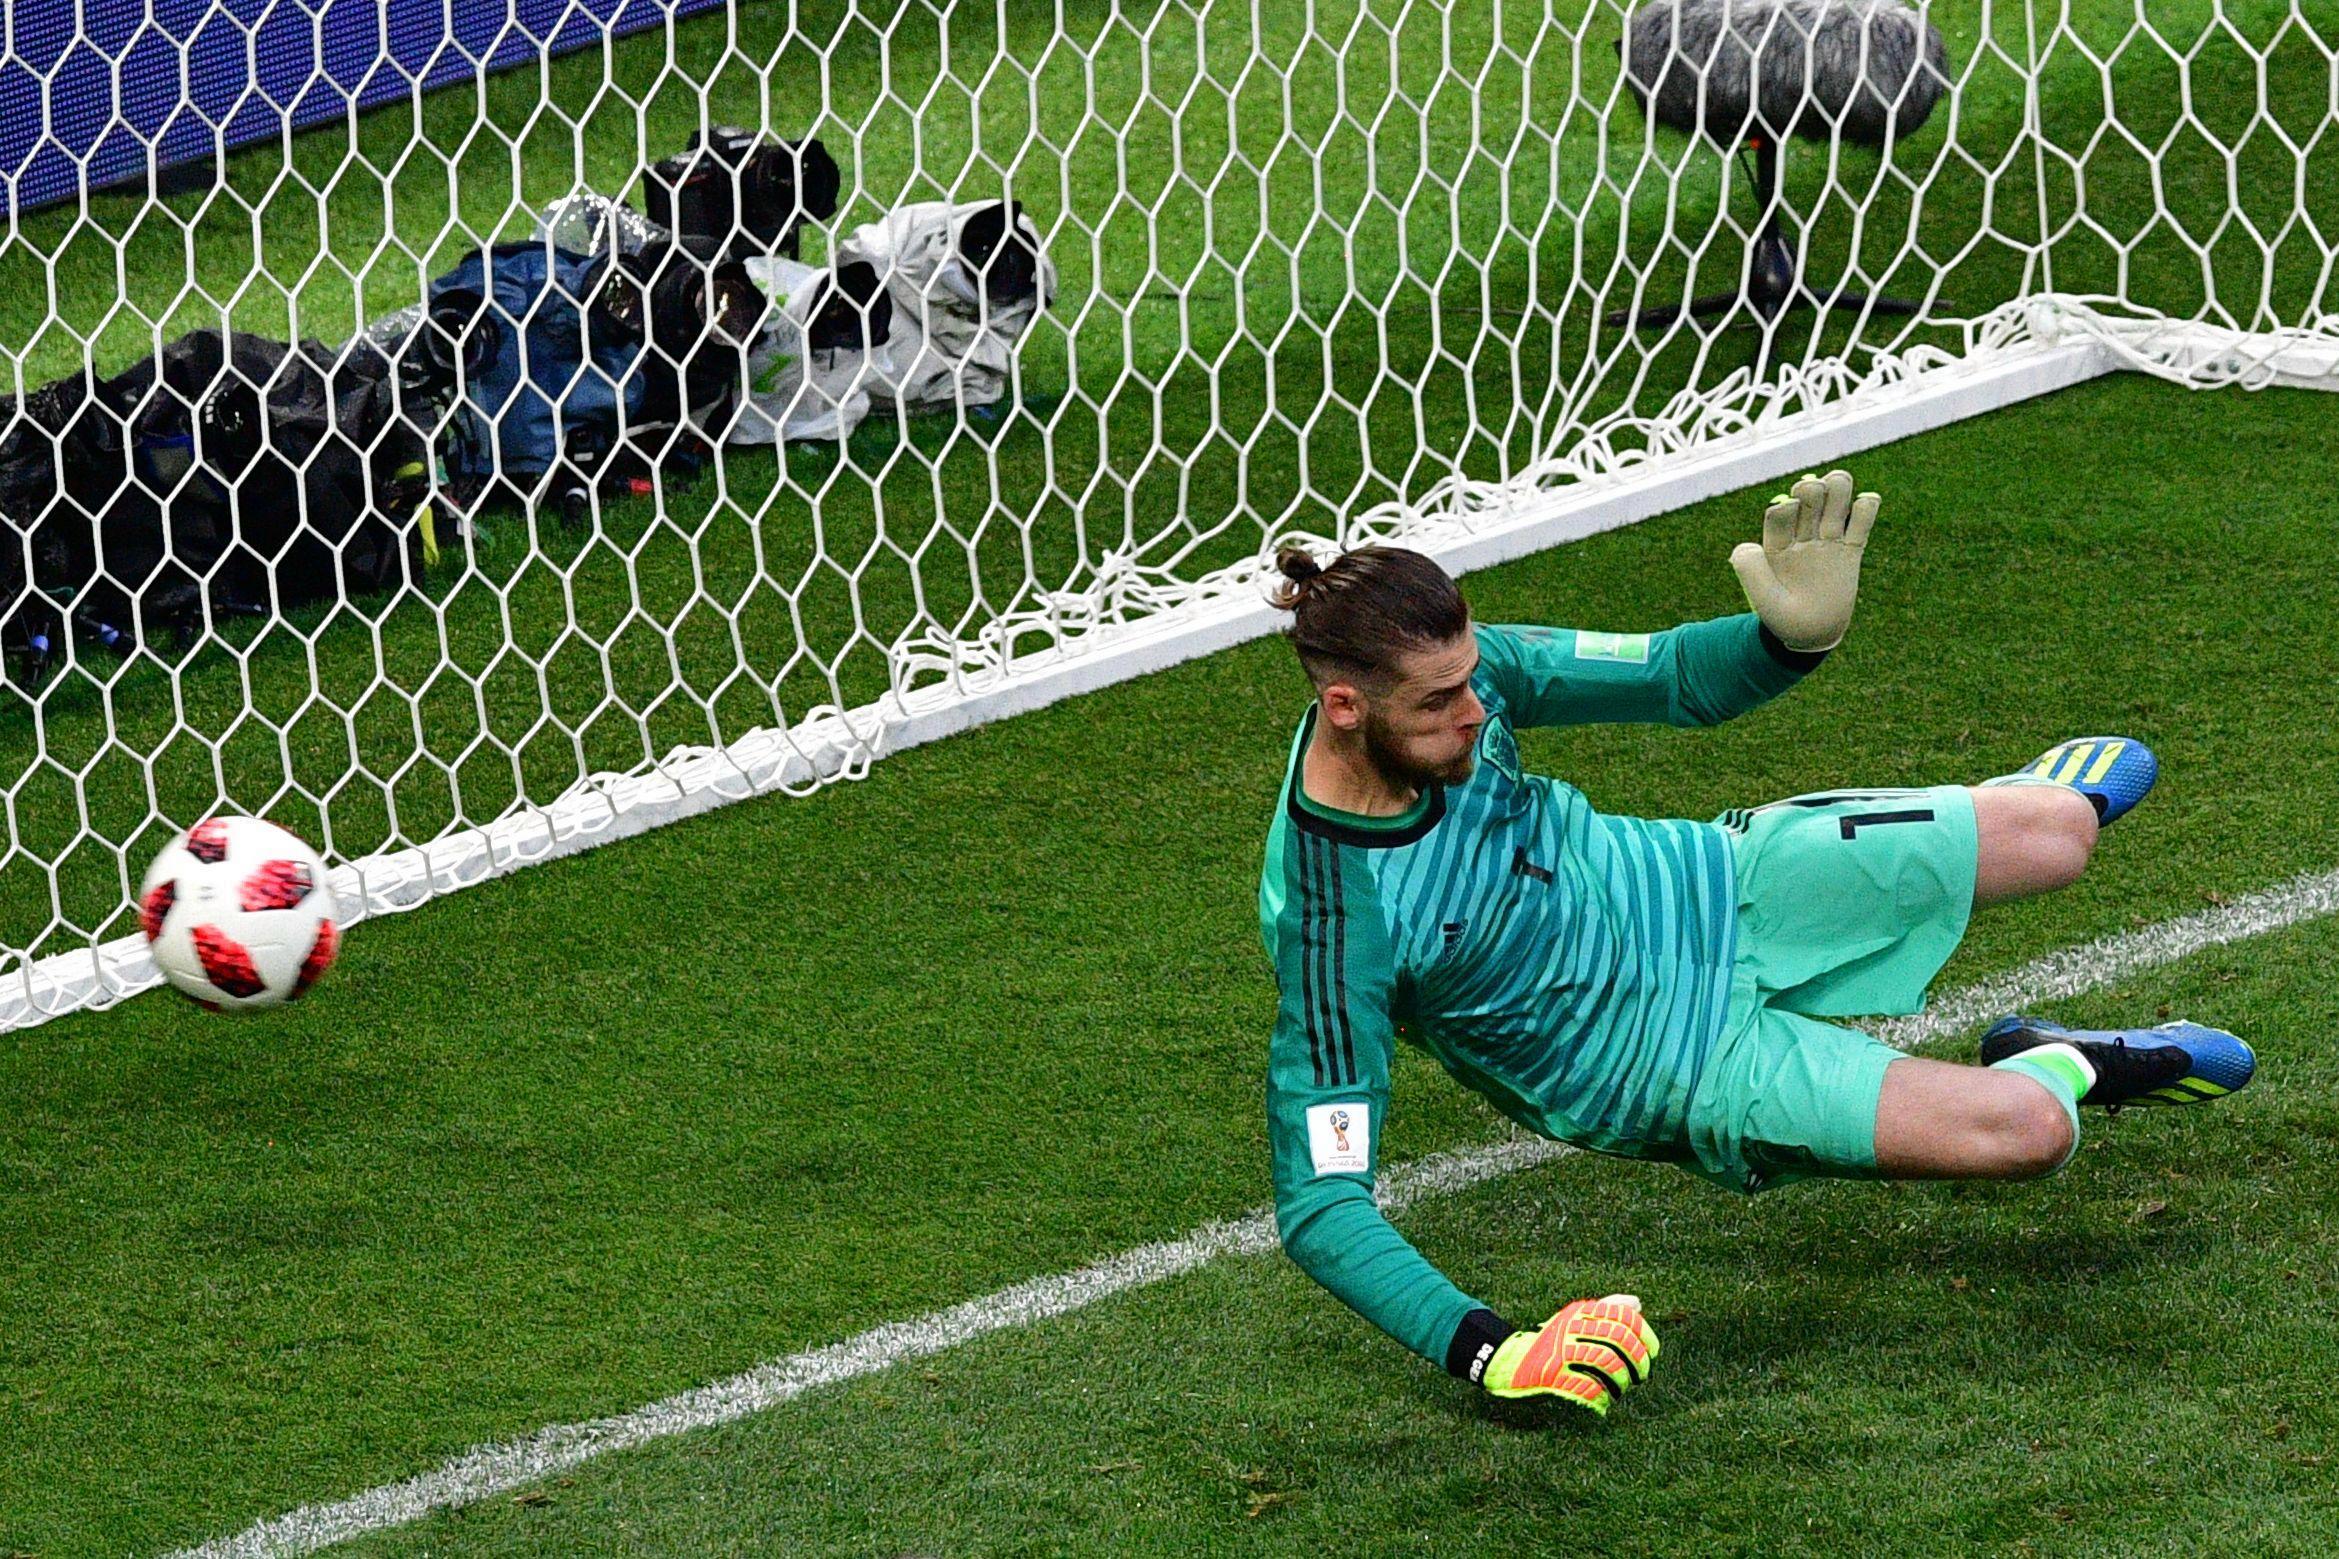 Fans turn on Manchester United star David De Gea after shock World Cup exit for Spain